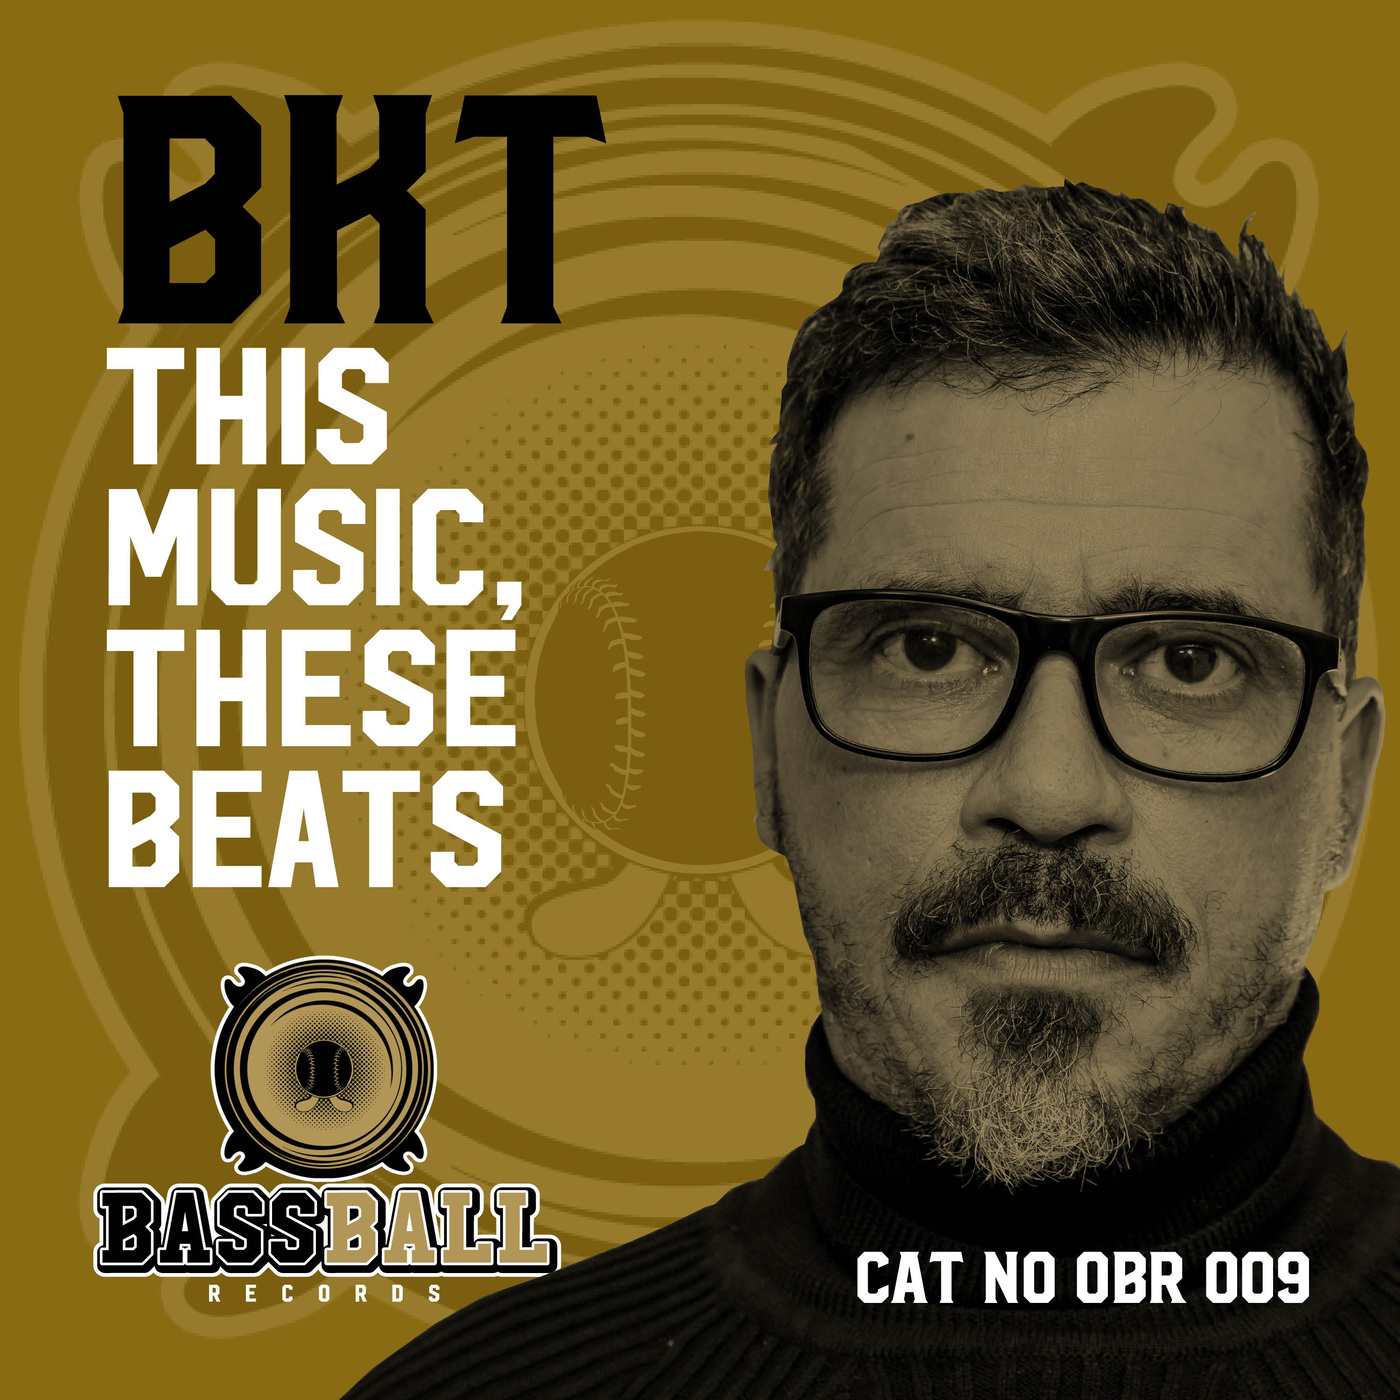 BKT - This Music, These Beats / Bassball Records